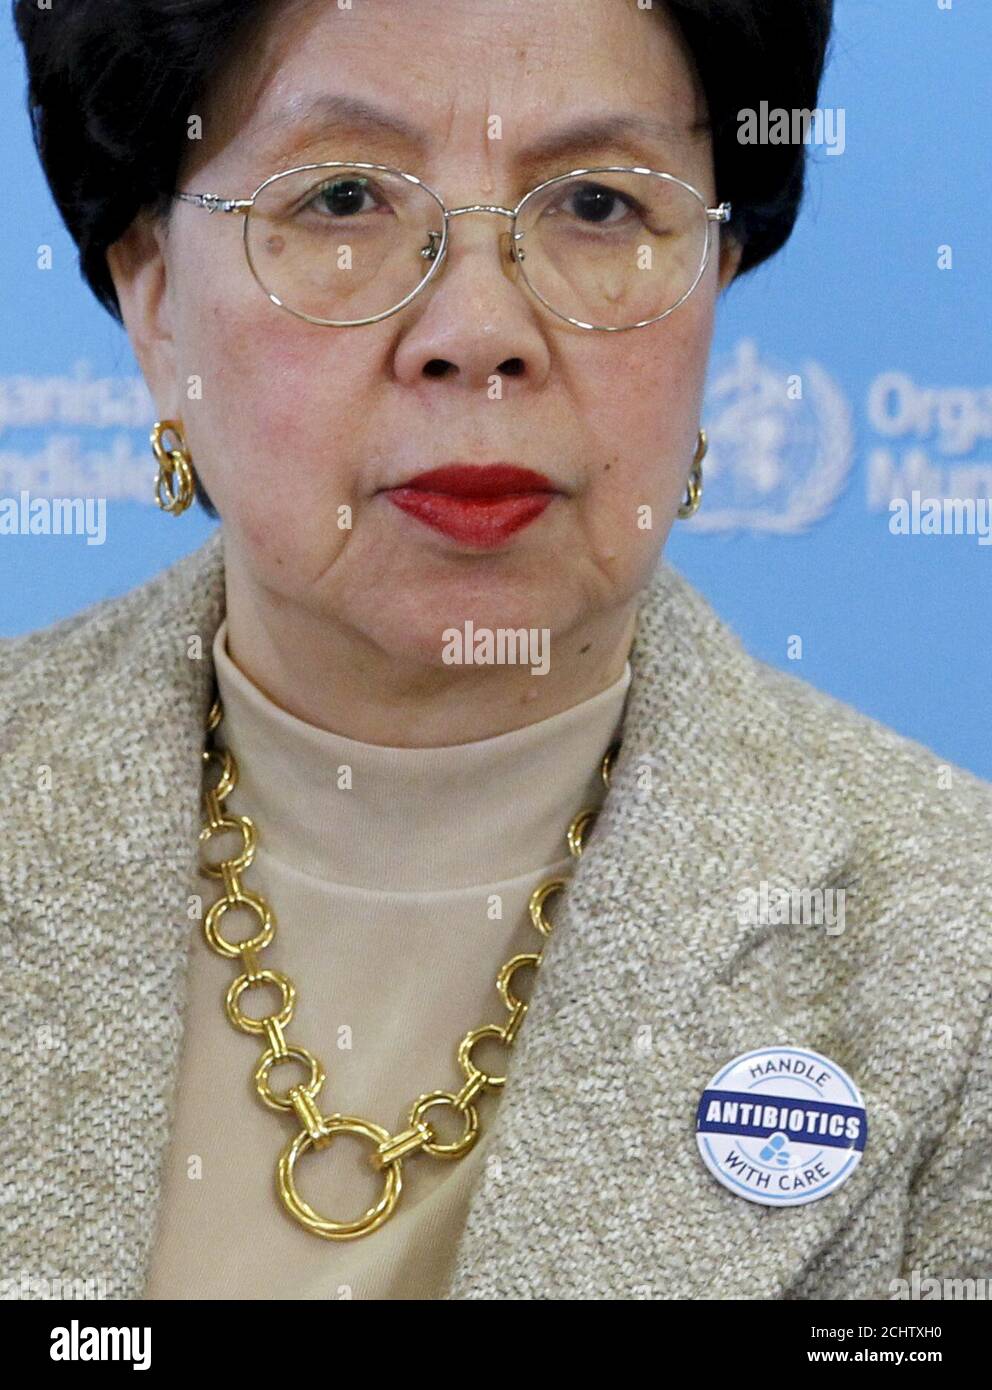 World Health Organization (WHO) director-general Margaret Chan attends a news conference on the results of a multi-country survey on antibiotic use and antibiotic resistance, during the launch of a new global campaign, in Geneva, Switzerland, November 16, 2015. REUTERS/Pierre Albouy Stock Photo